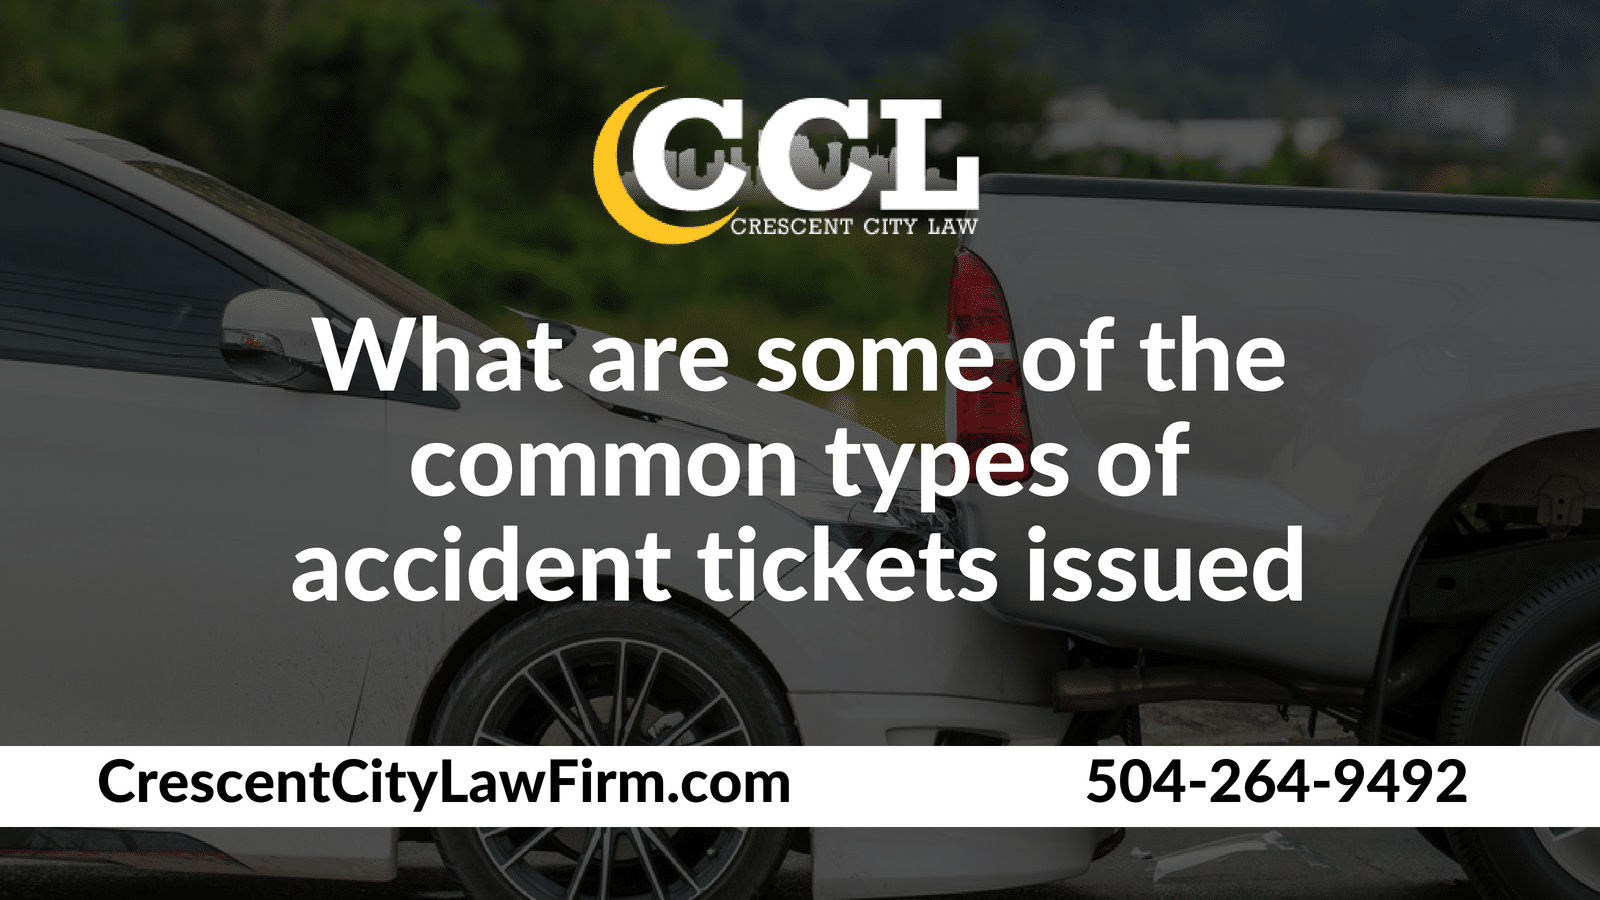 What are some of the common types of accident tickets issued